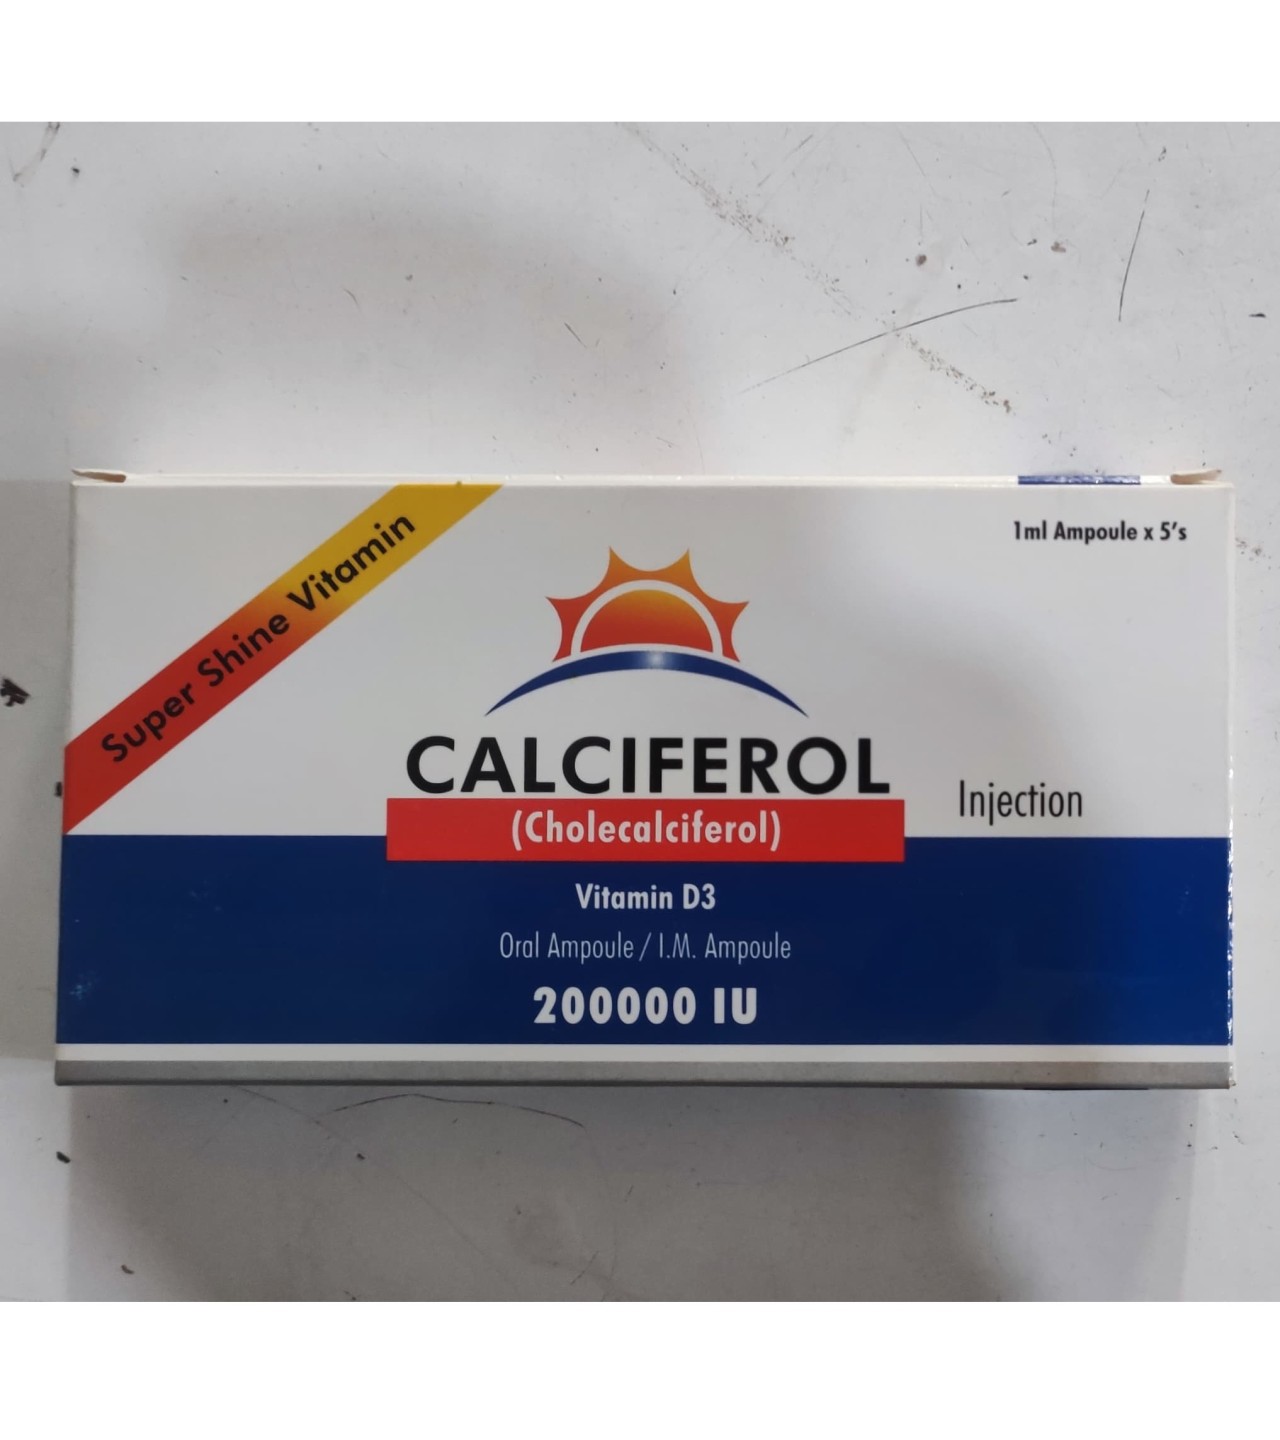 Calciferol injection vitamin D3 pack of 5 (5s)